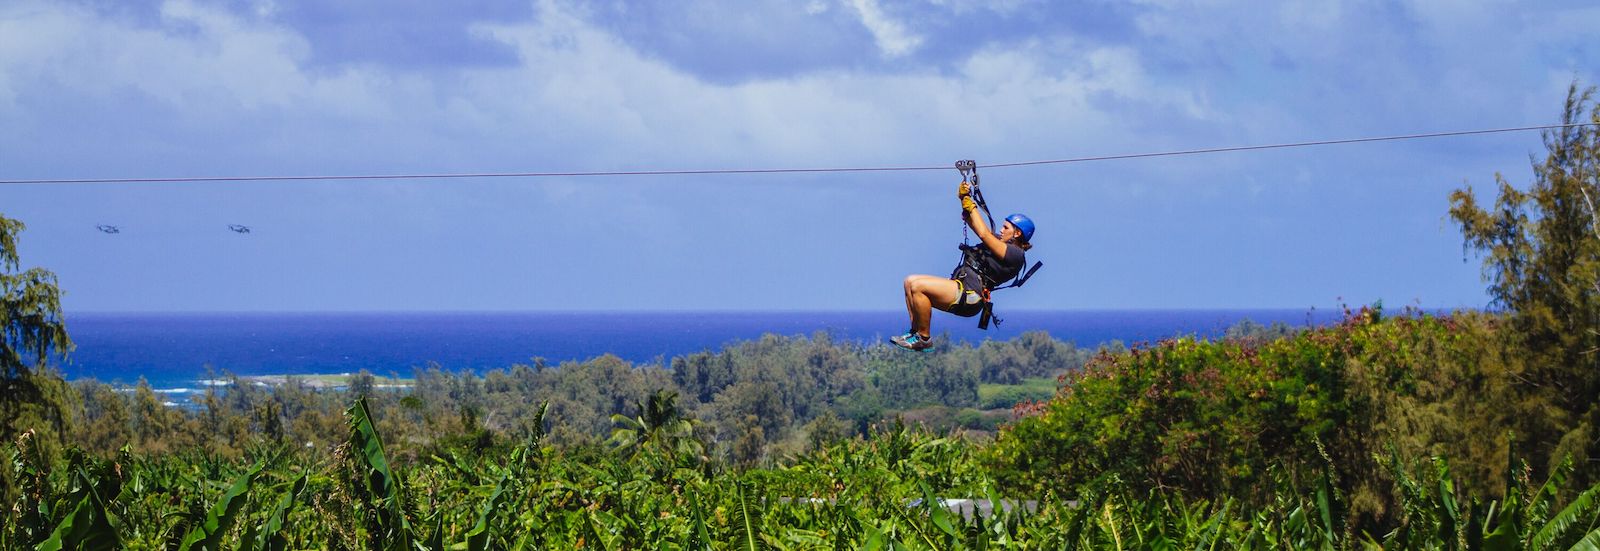 Top 4 Reasons Why Our Ziplines in Hawaii are Fun for a Solo Traveler